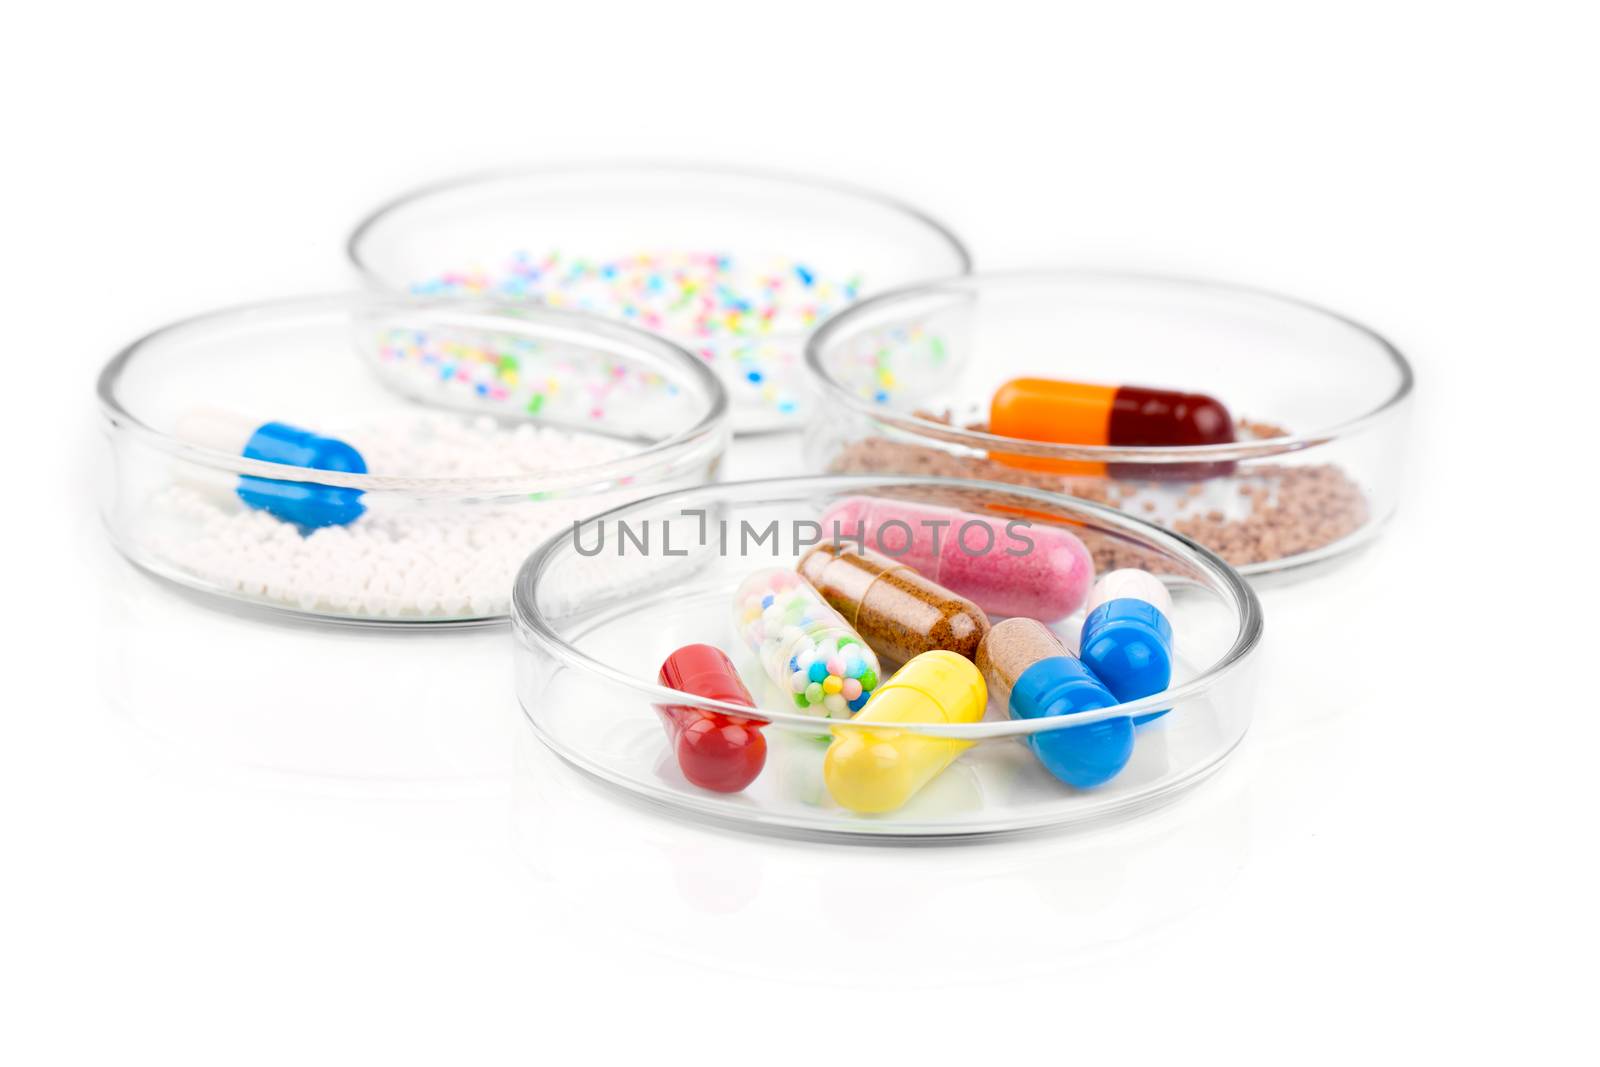 Colorful medical capsules in Petri dishes. Laboratory concept.